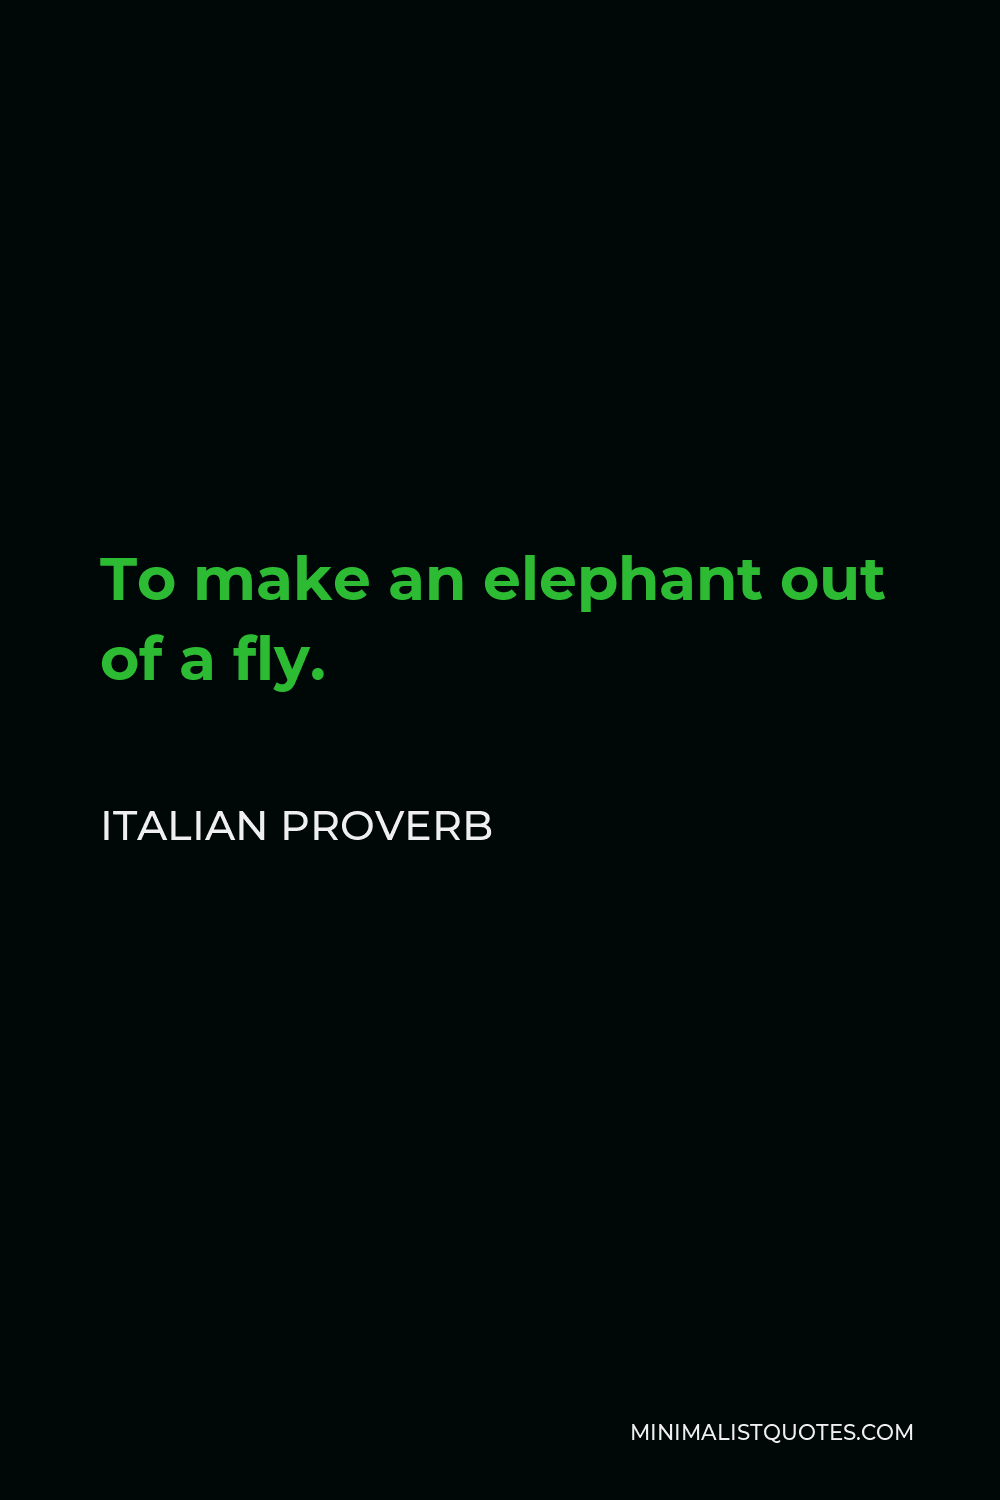 Italian Proverb Quote - To make an elephant out of a fly.